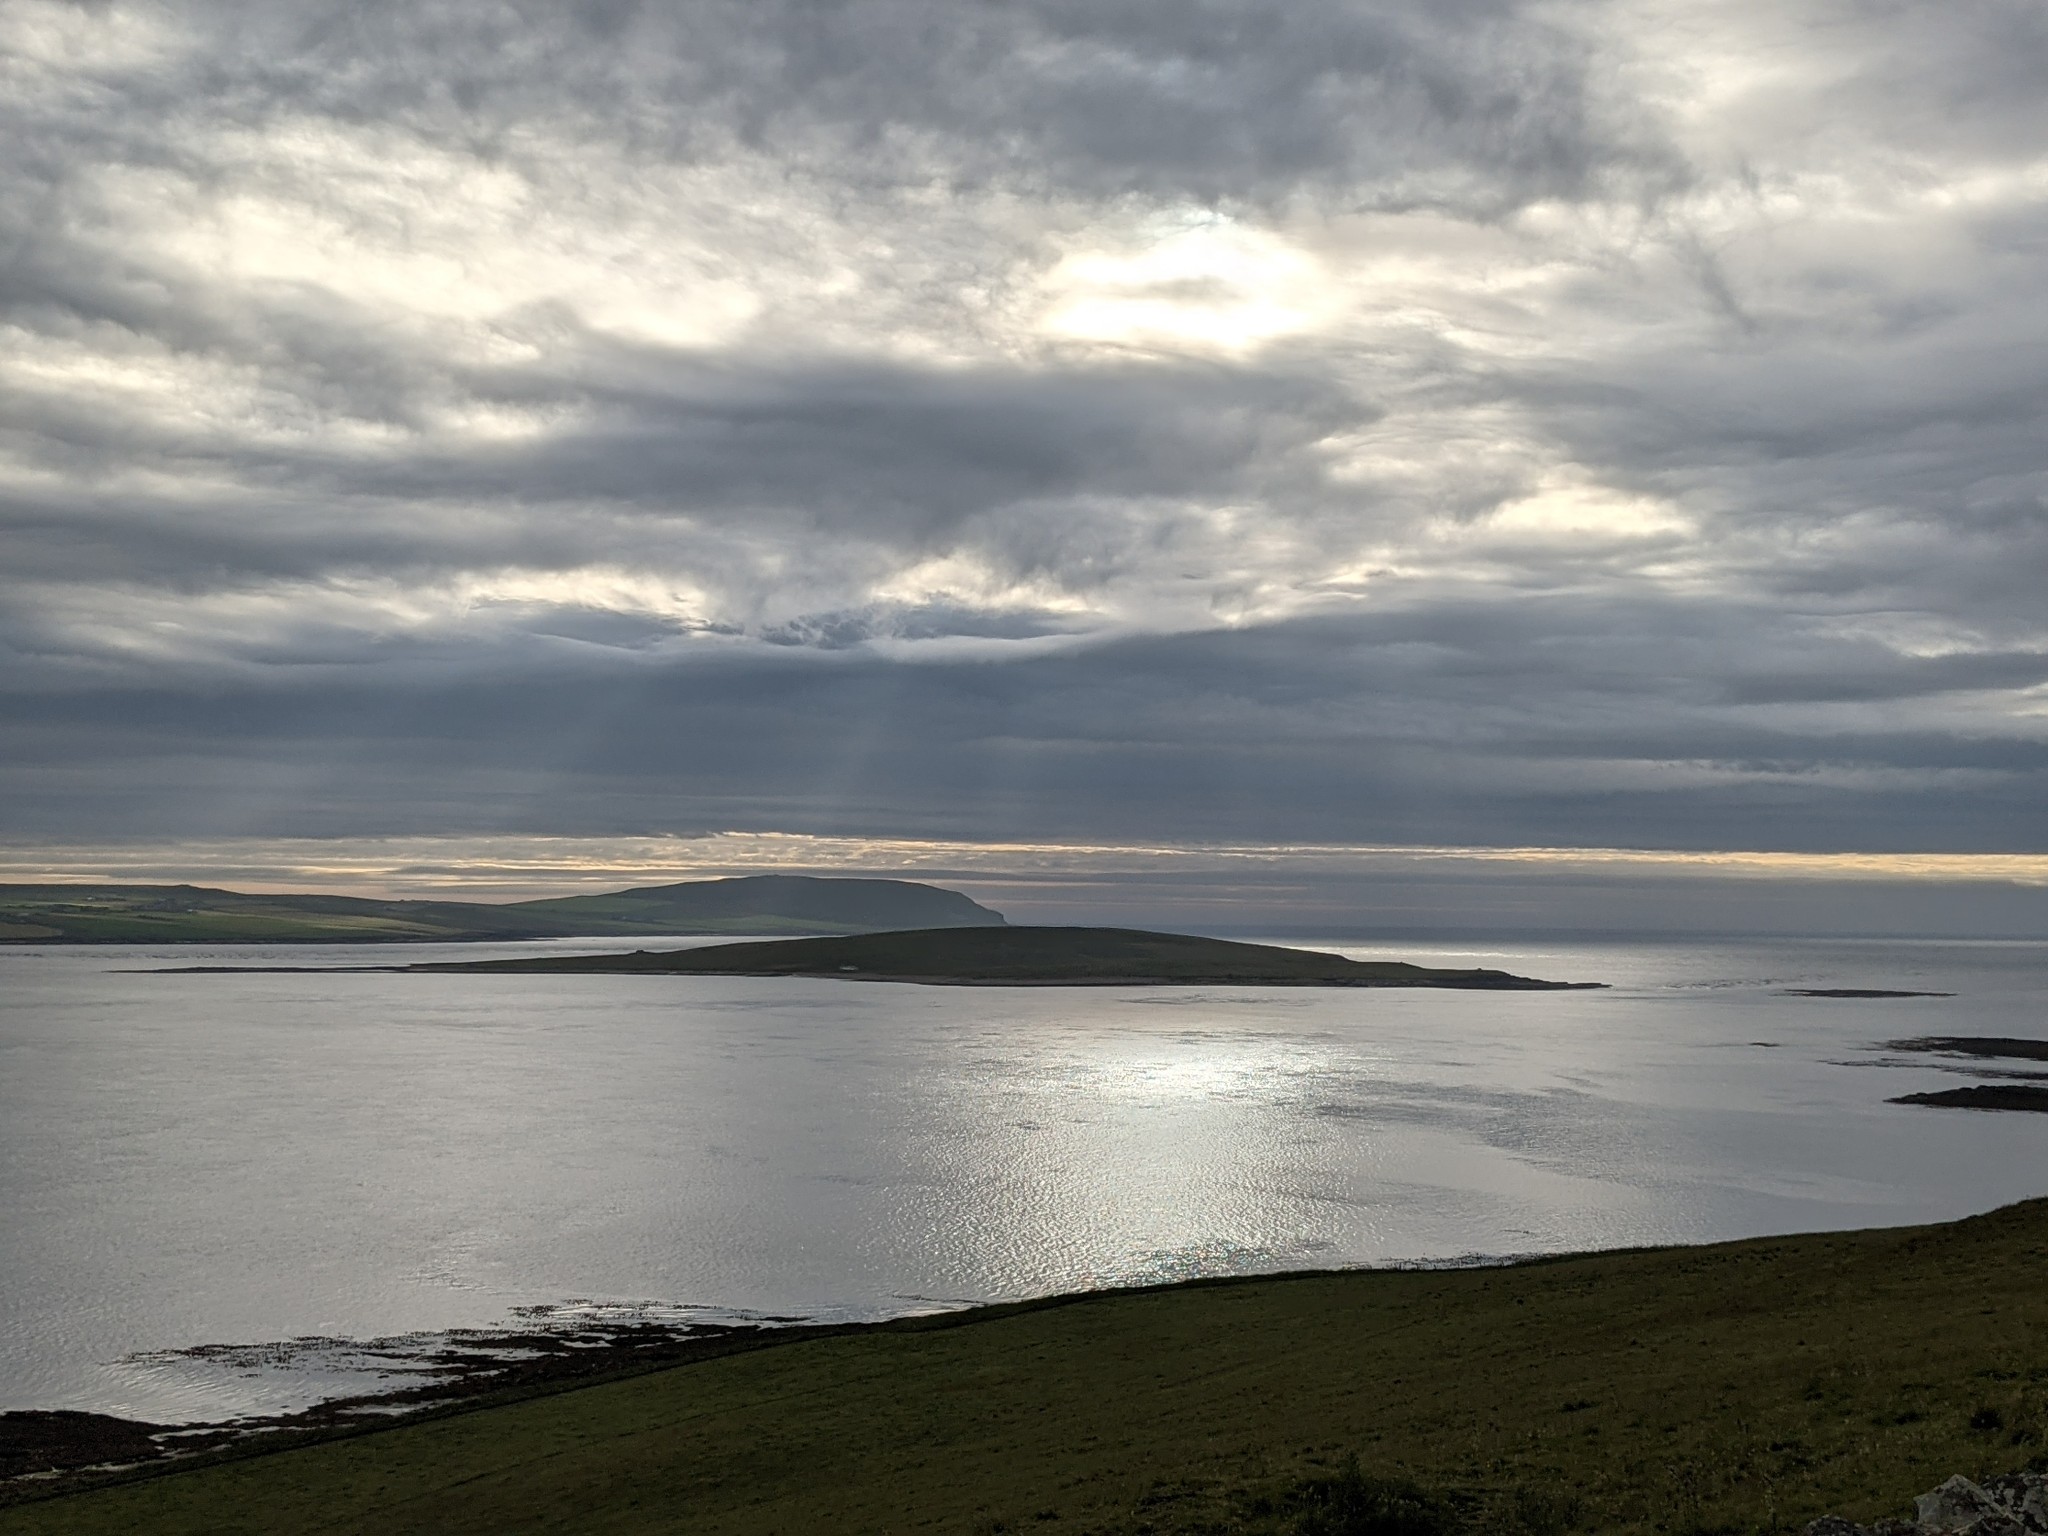 View of Eynhallow from Rousay - image by David Weinczok